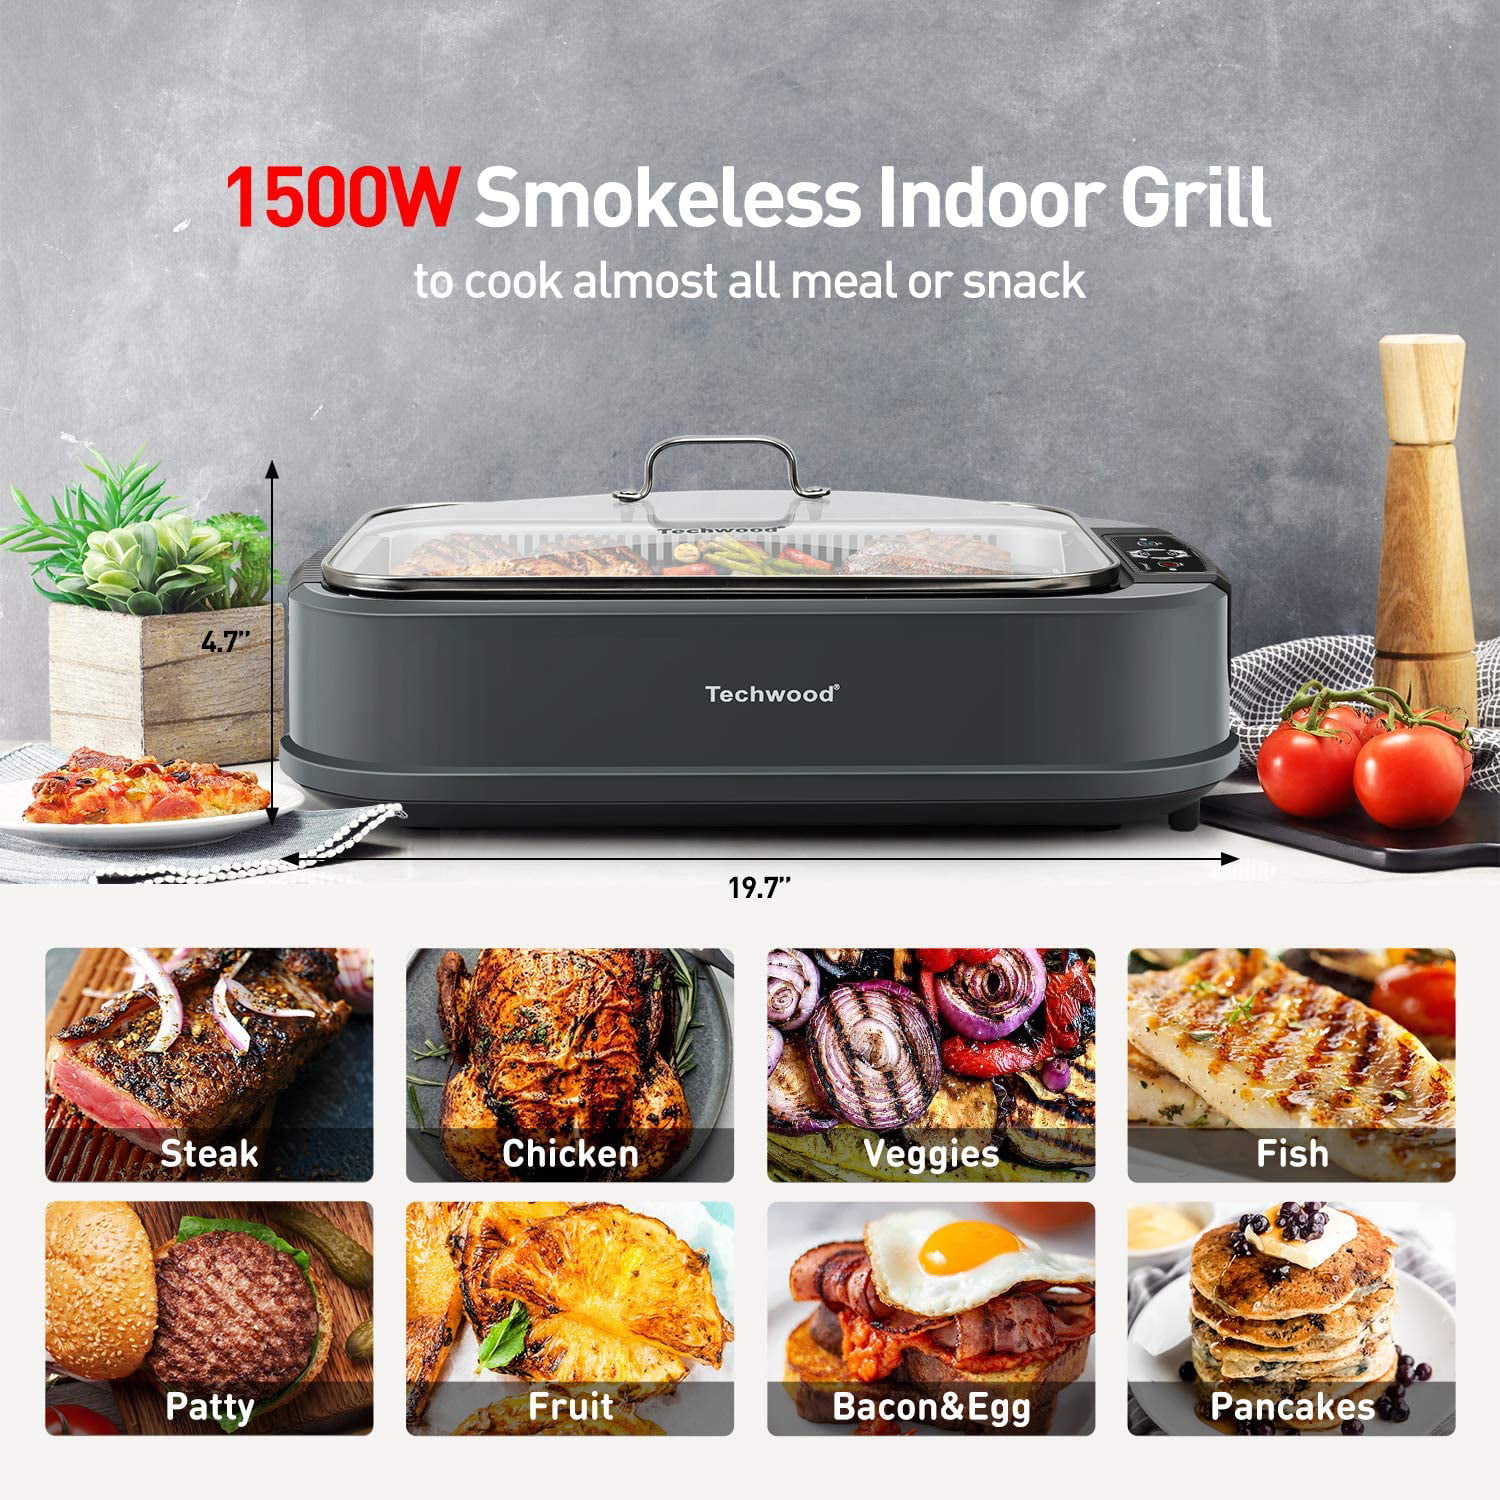 Indoor Smokeless Grill Techwood 1500W Electric Grill with Tempered Glass Lid & LED Smart Control Panel, 8-Level Control Korean BBQ Grill Wit